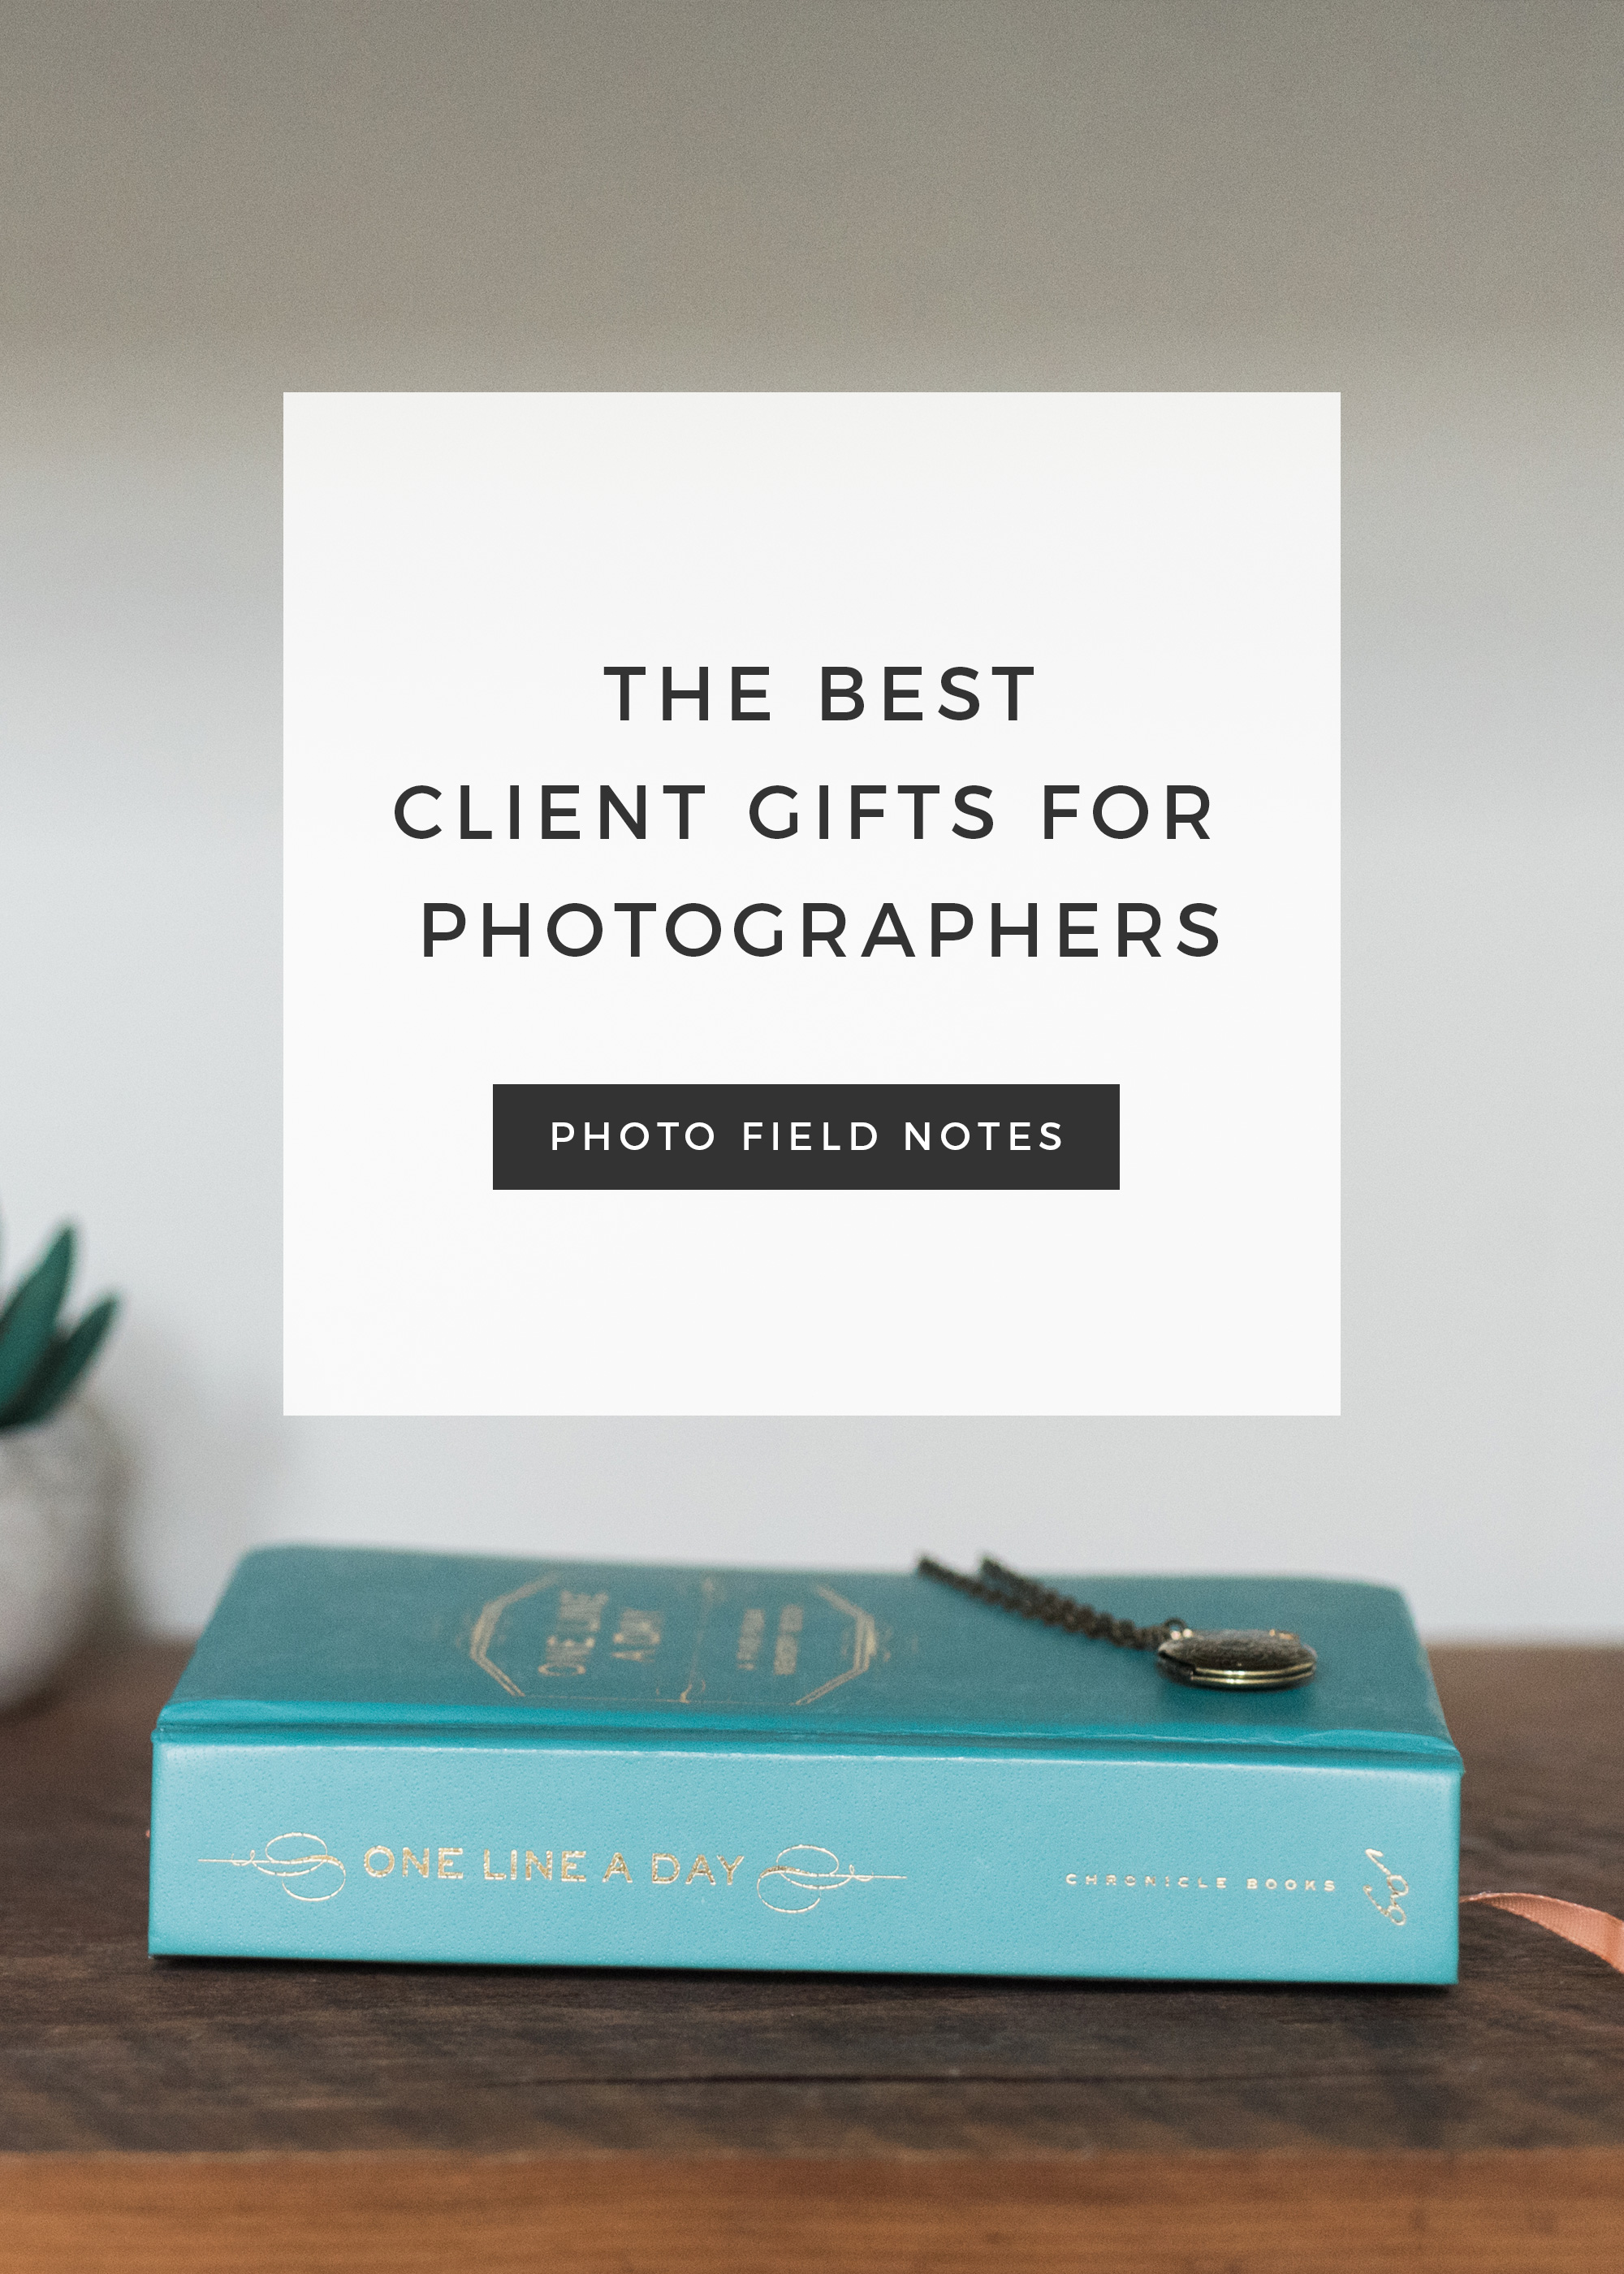 Top 10 Last-Minute Gifts for Photographers - 2021 Edition